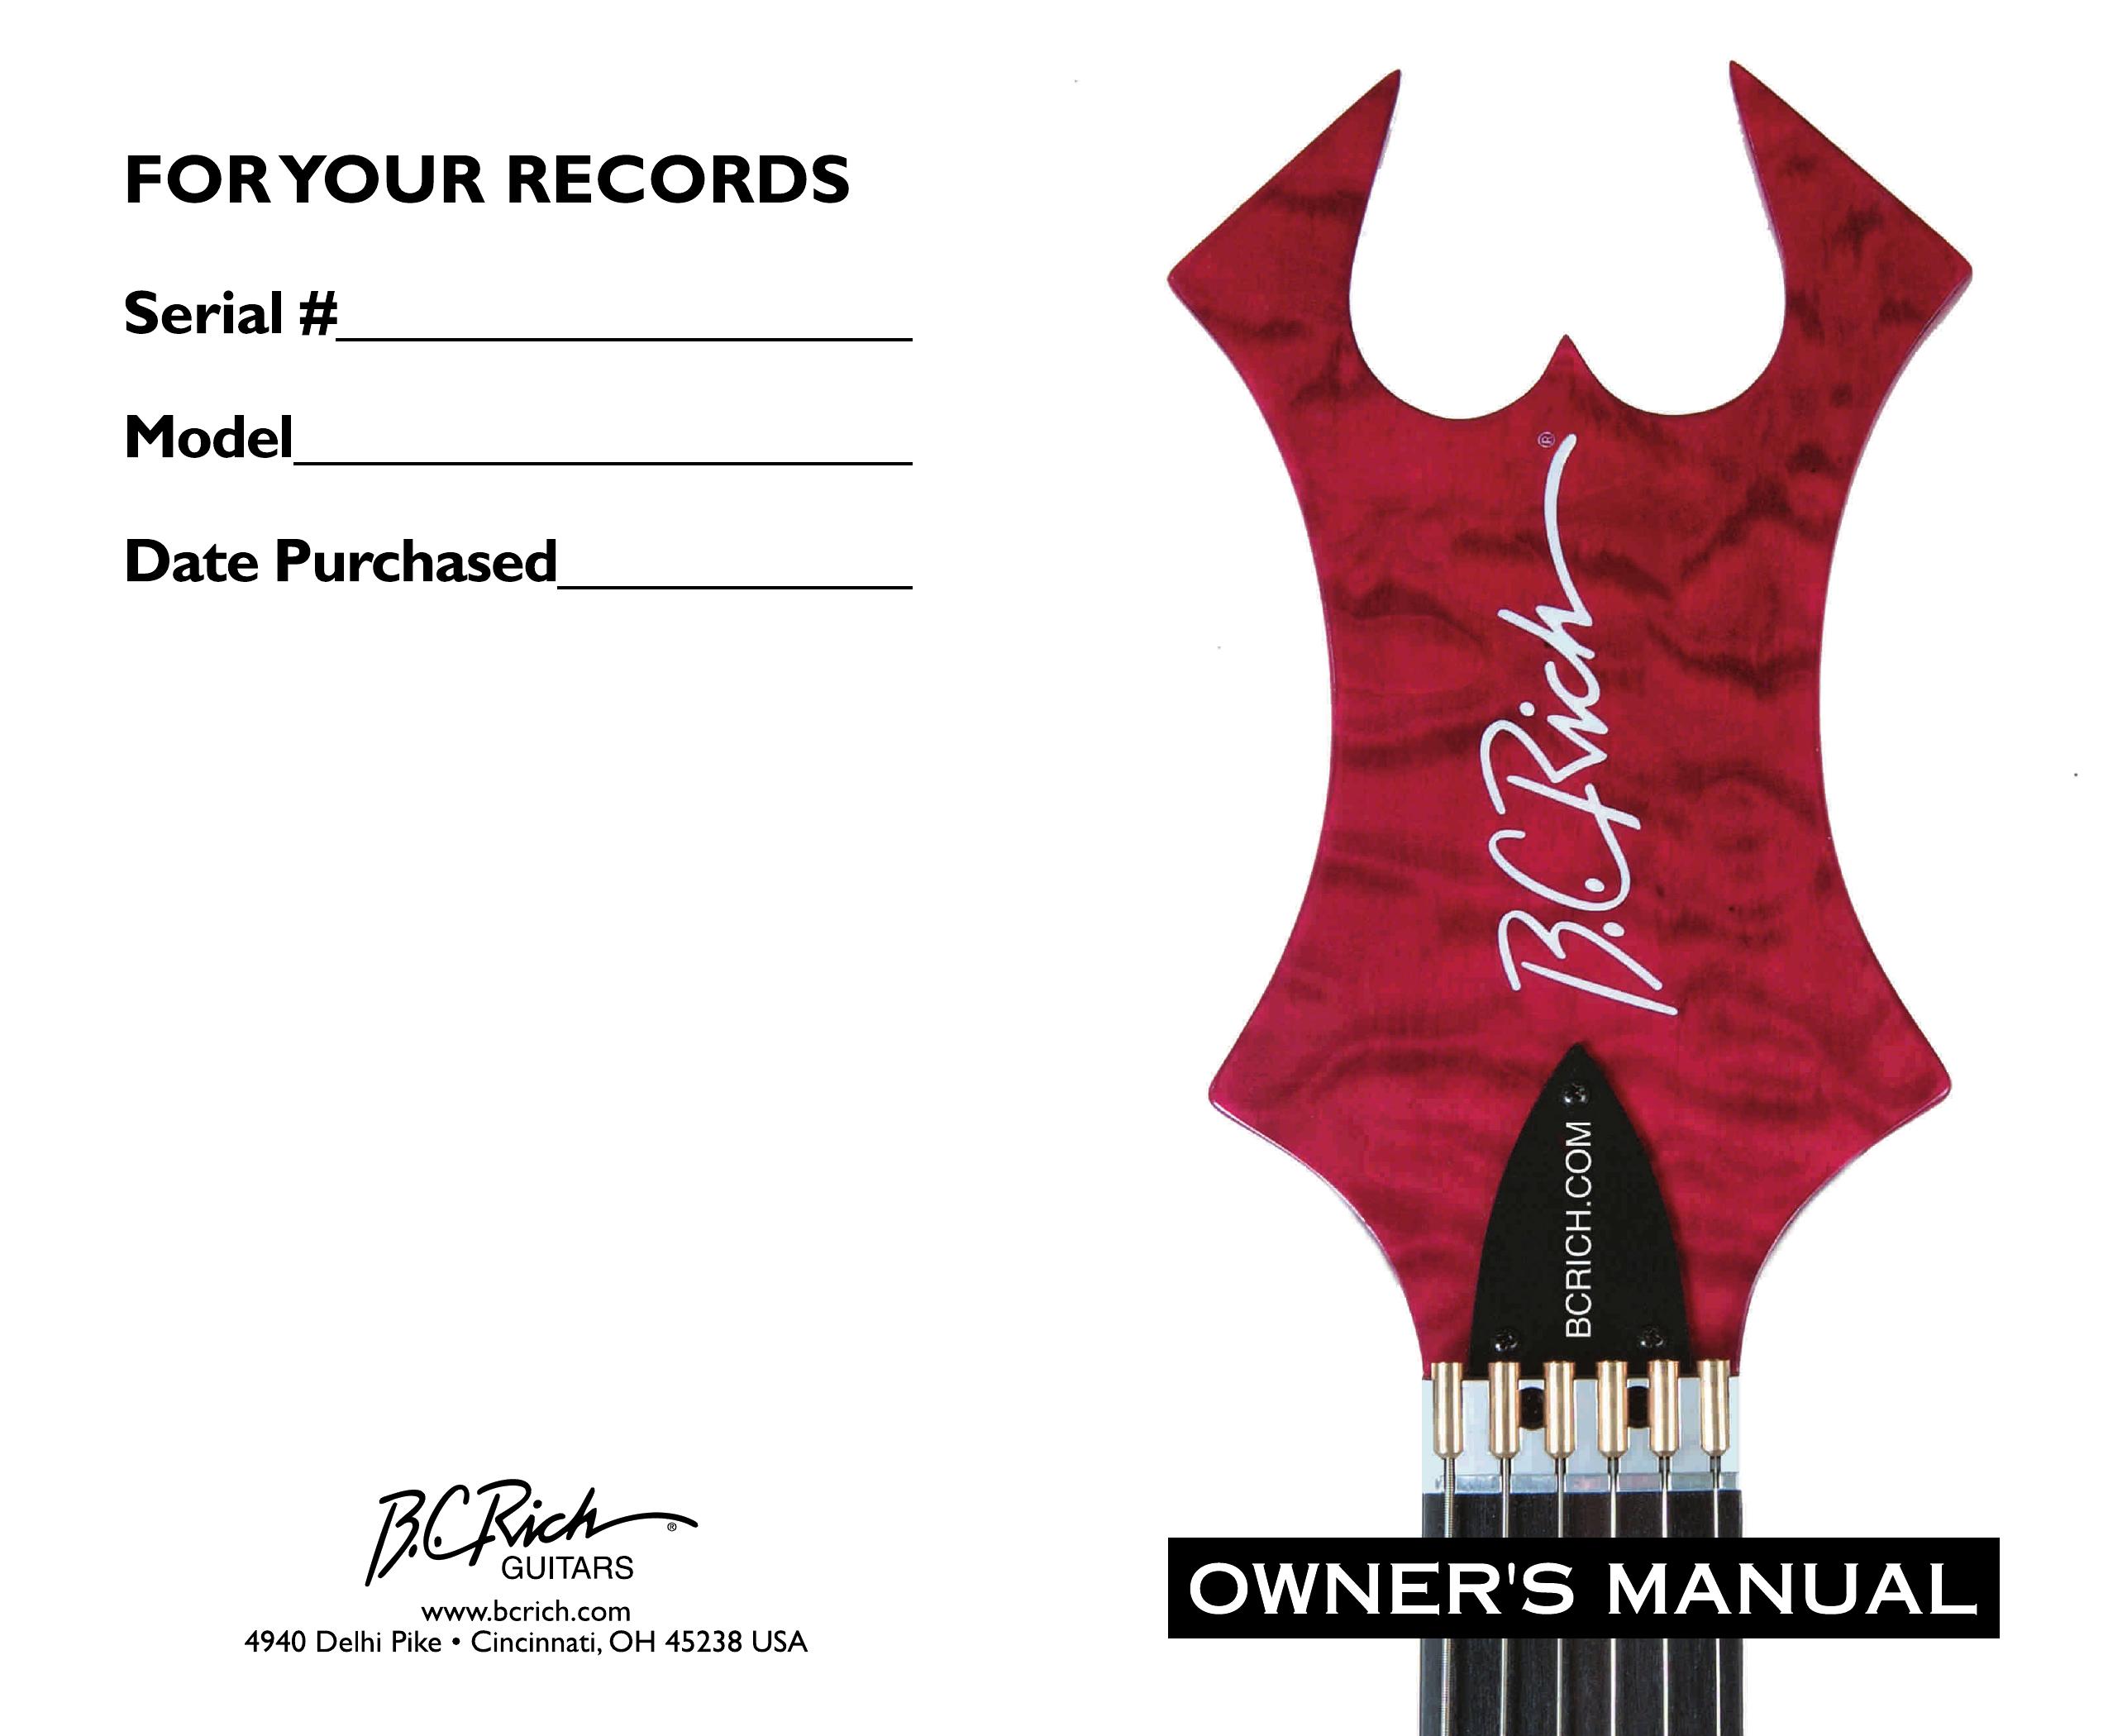 B.C. Rich Outlaw Guitar User Manual (Page 1)